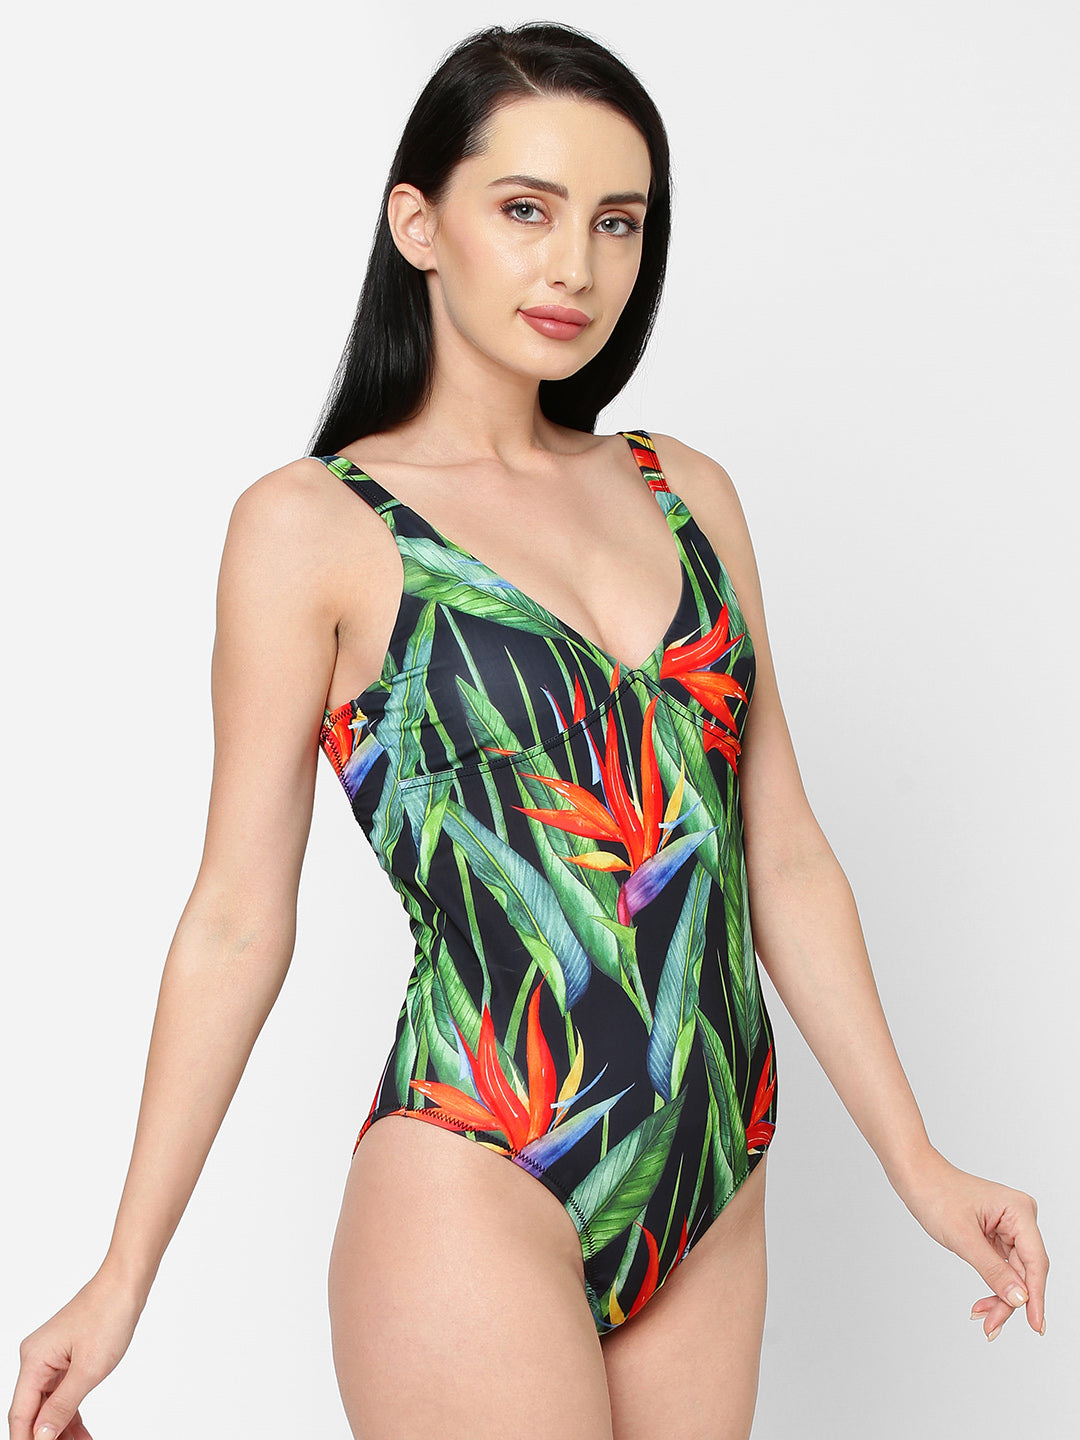 Esha Lal Swimwear one piece swimsuit in birds of paradise floral print